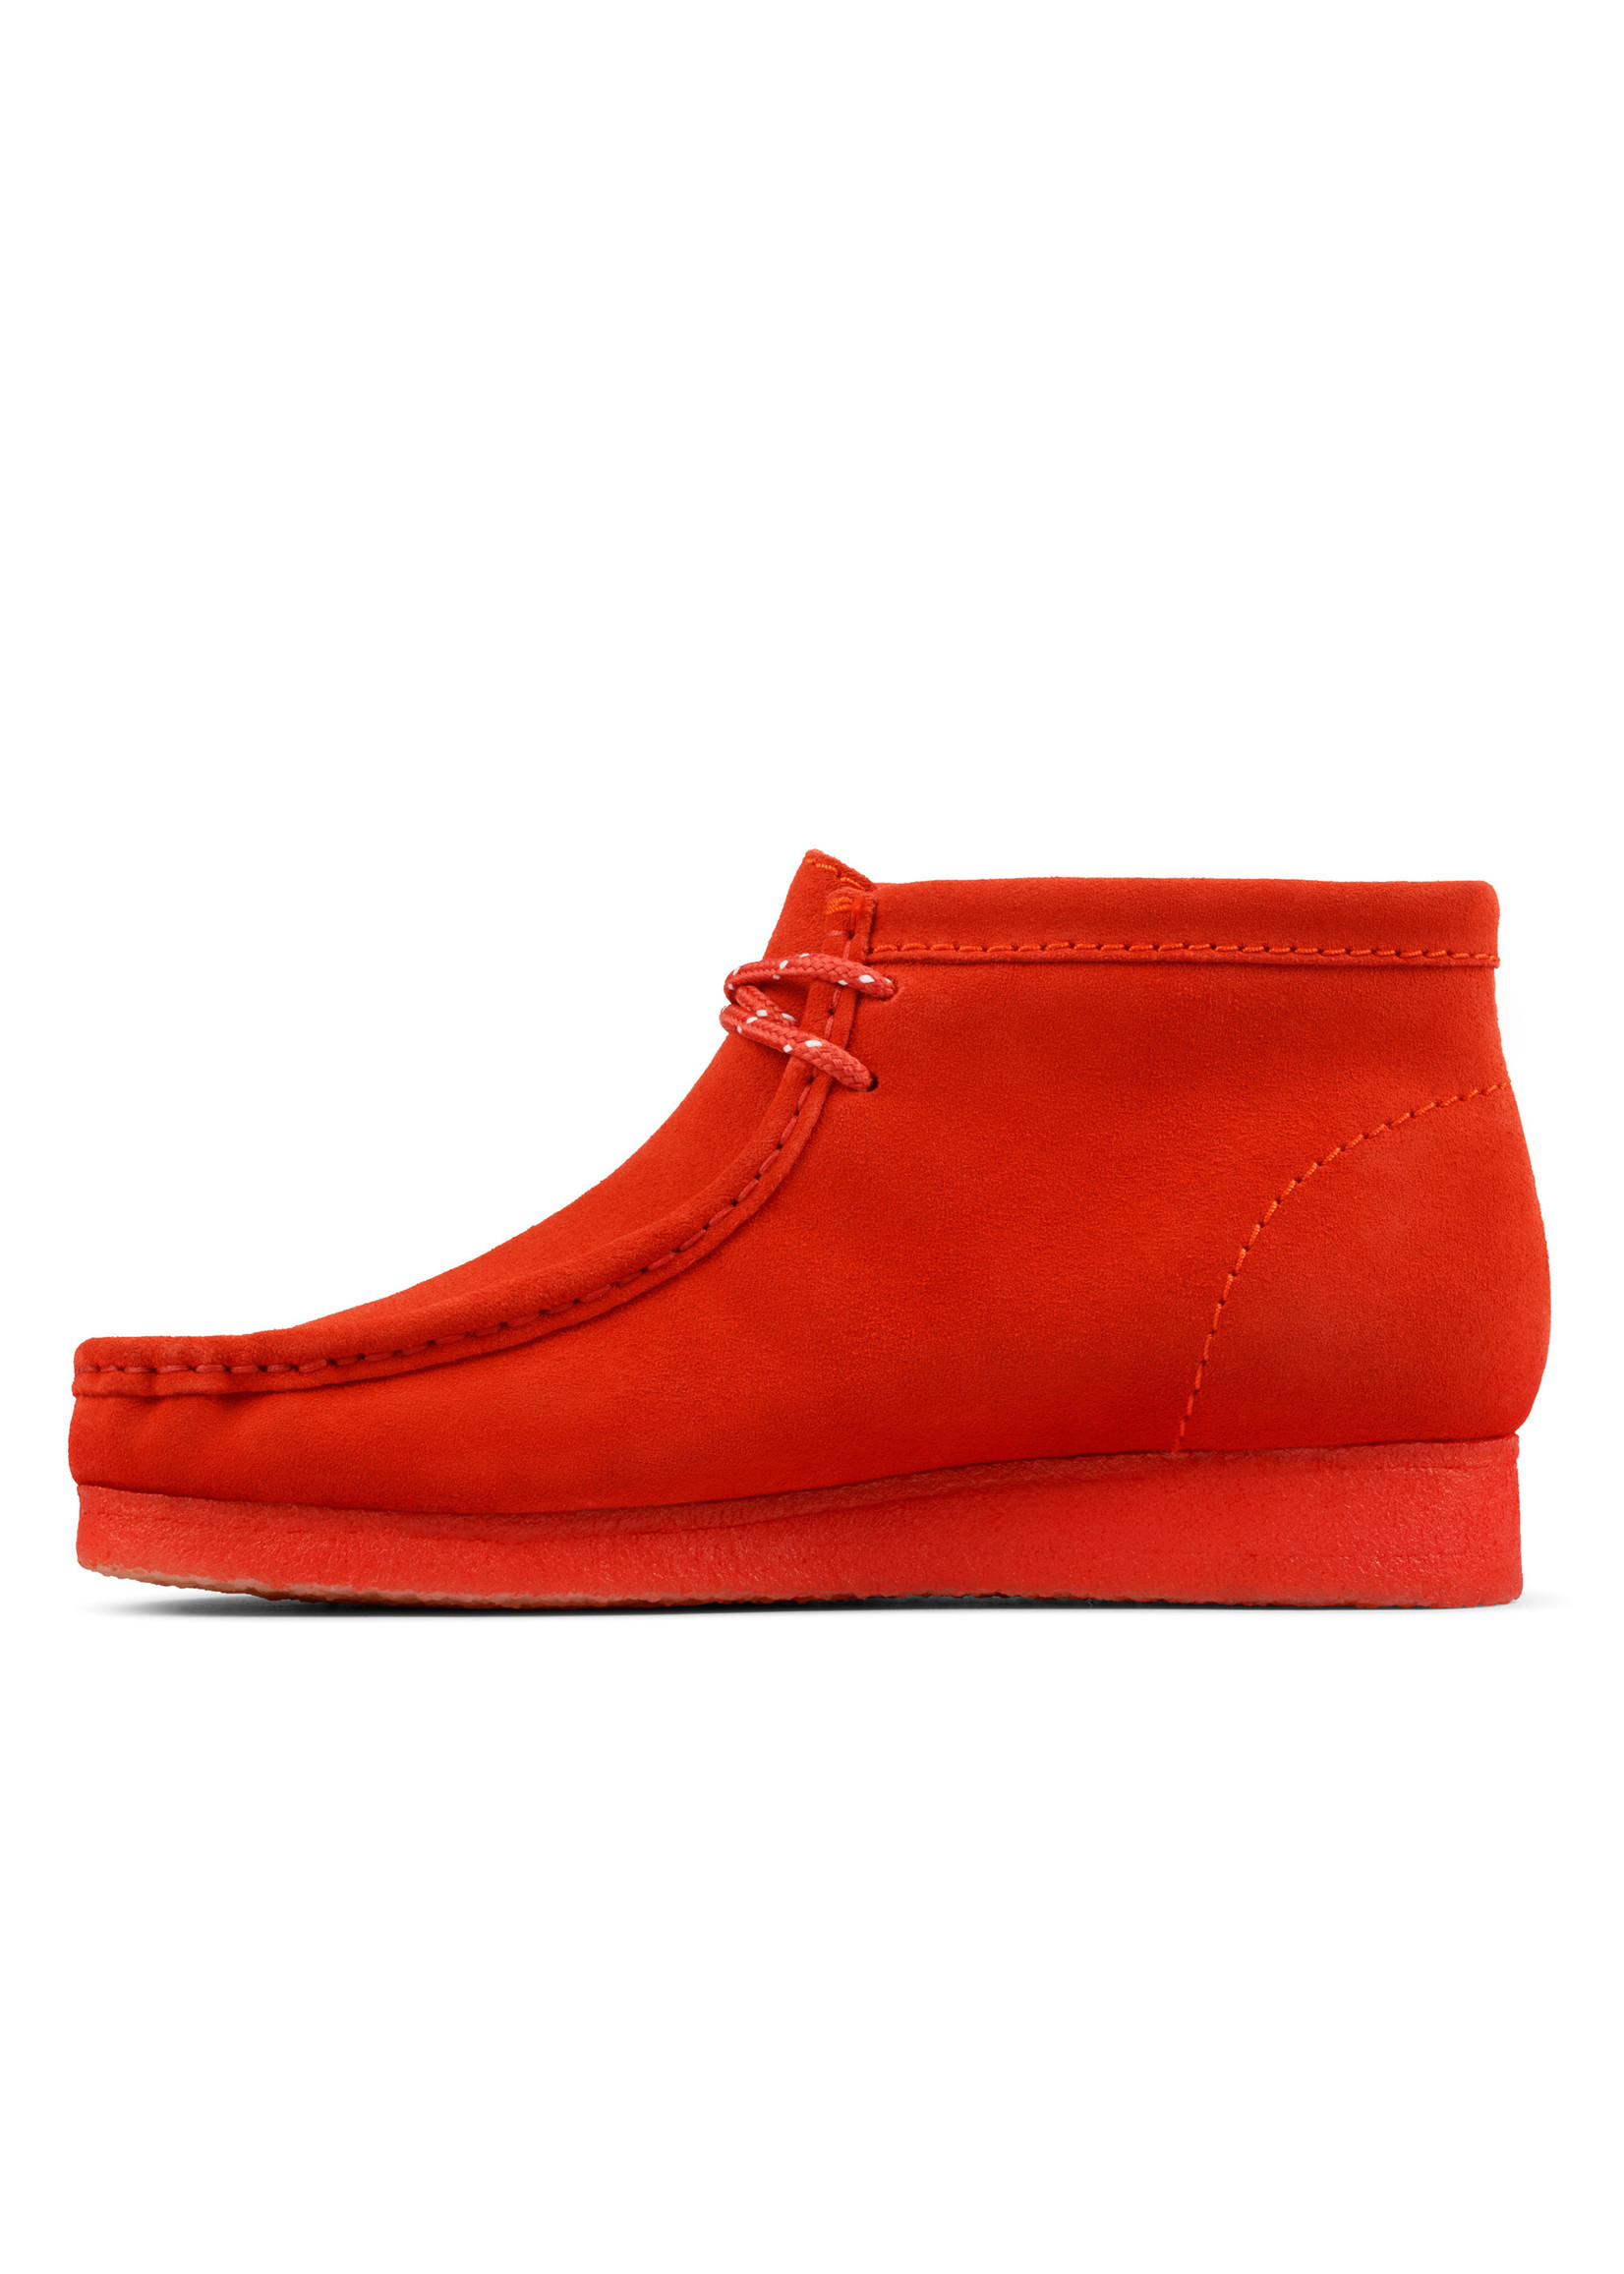 clarks wallabees red suede